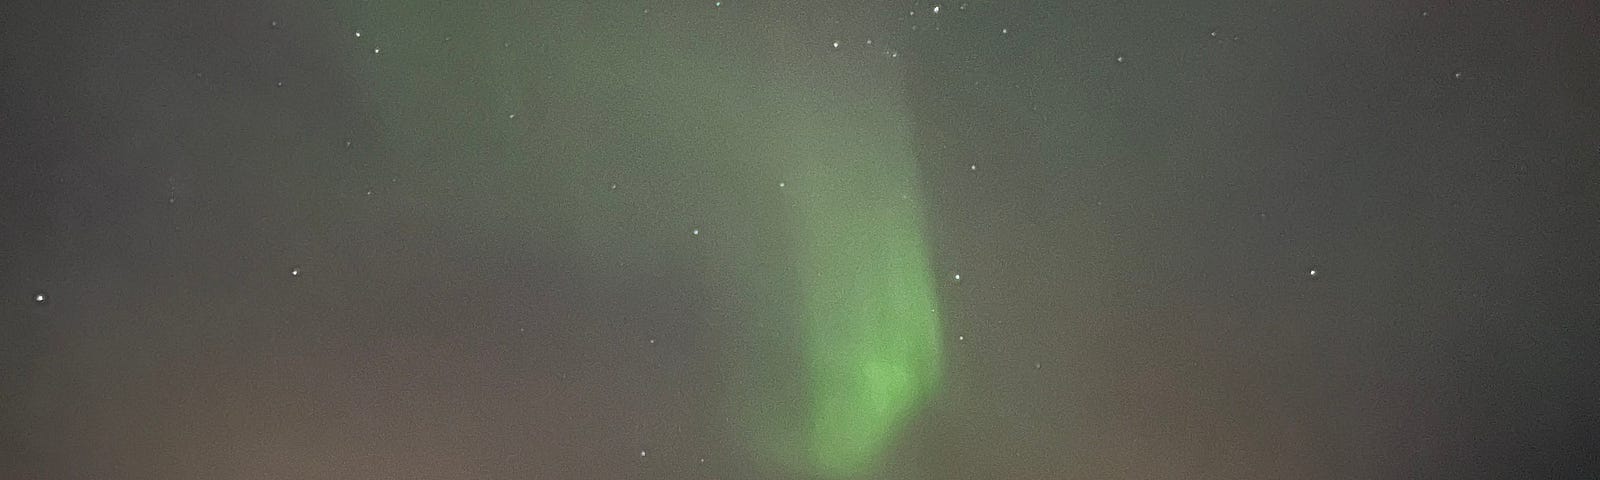 Picture of the northern lights.